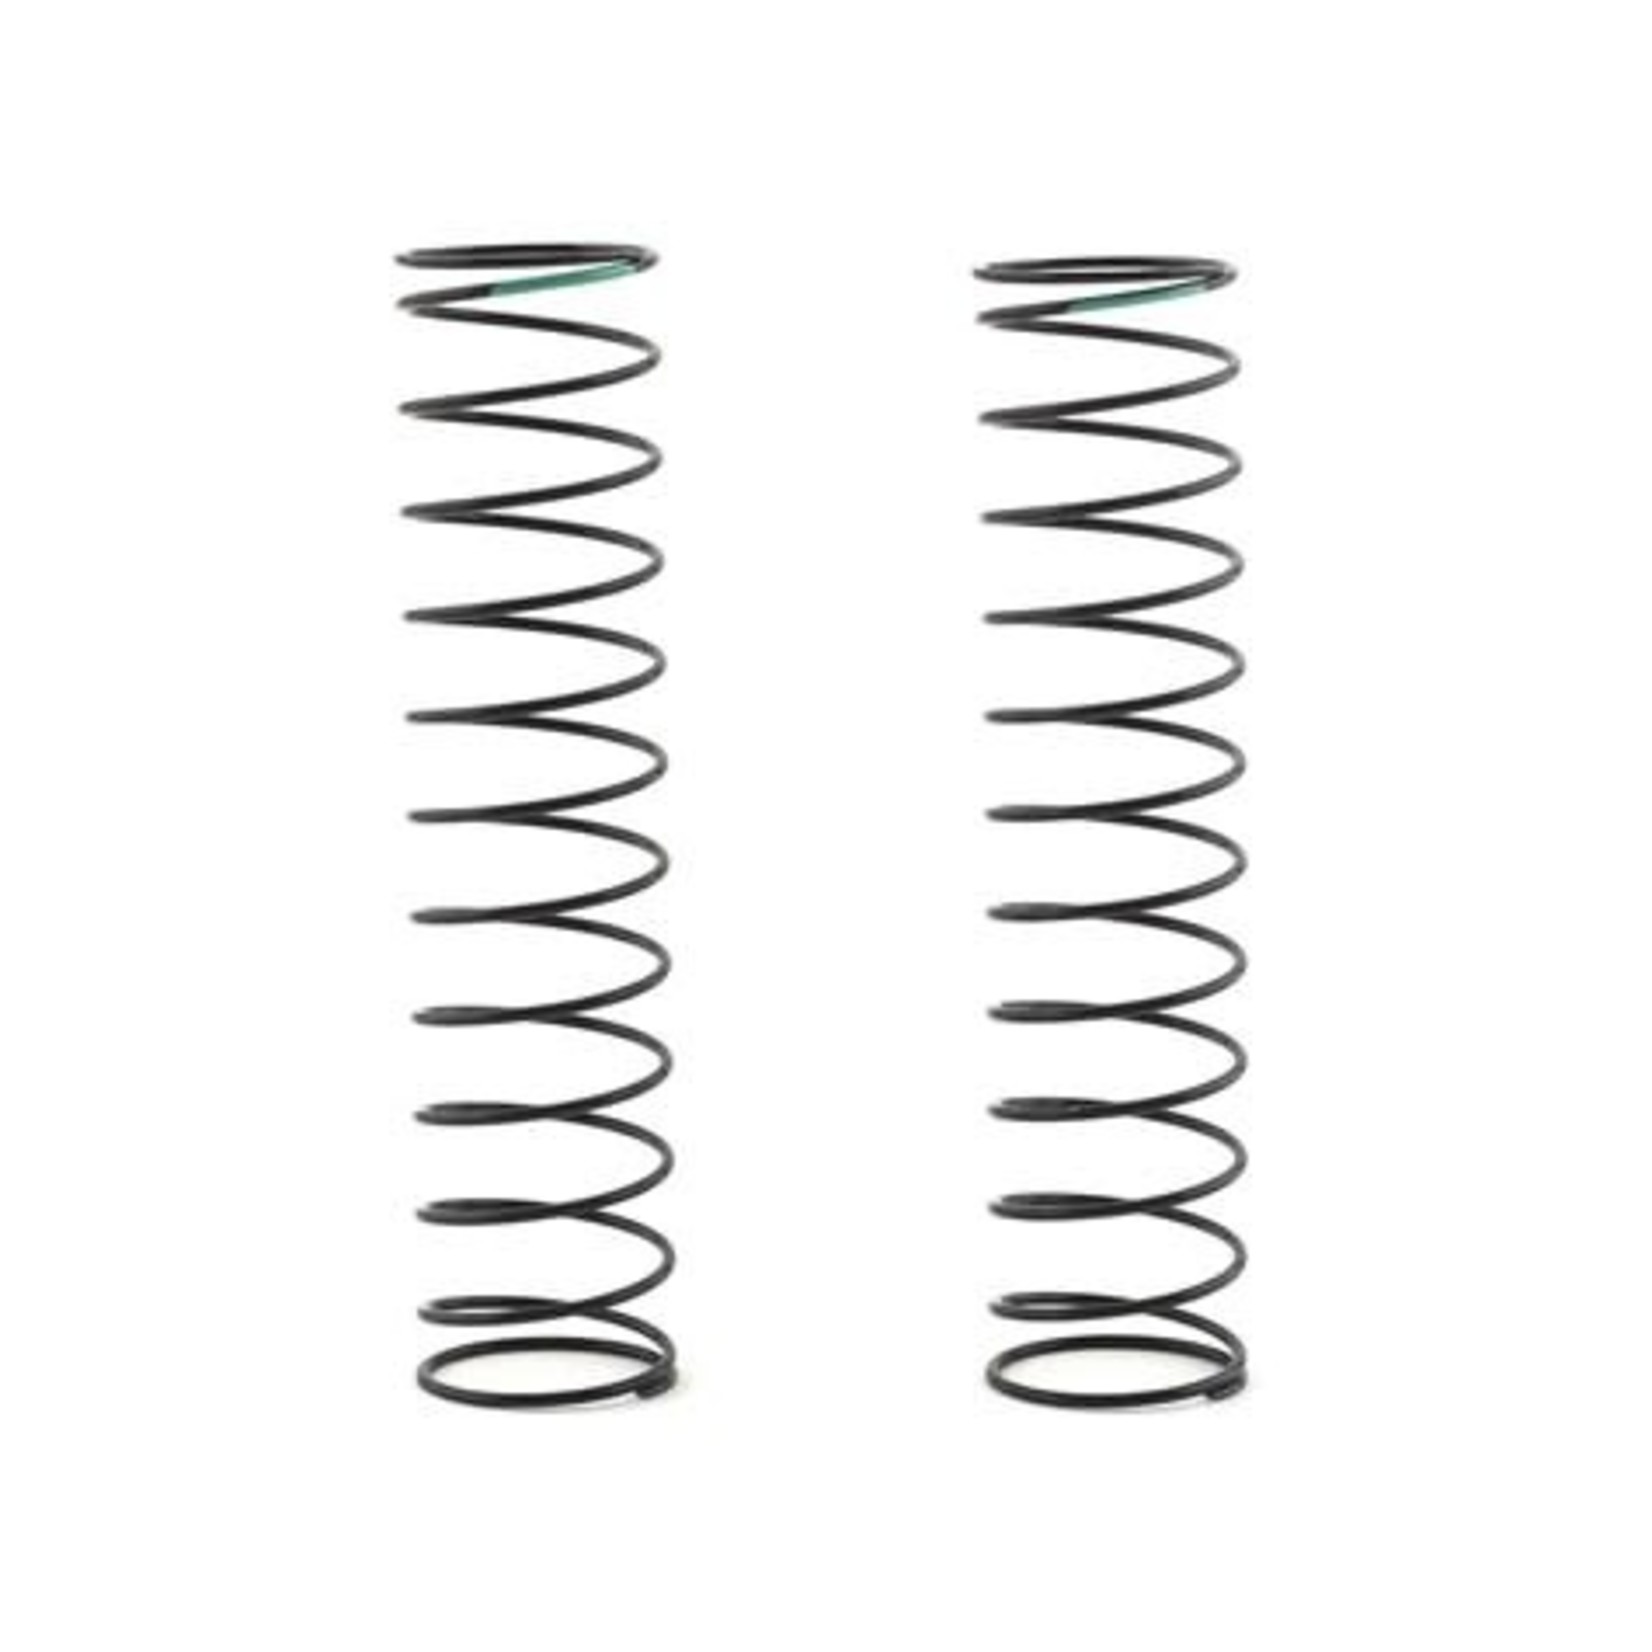 Element RC Element RC 63mm Shock Spring (Green - .71 lb/in) (2) #42087